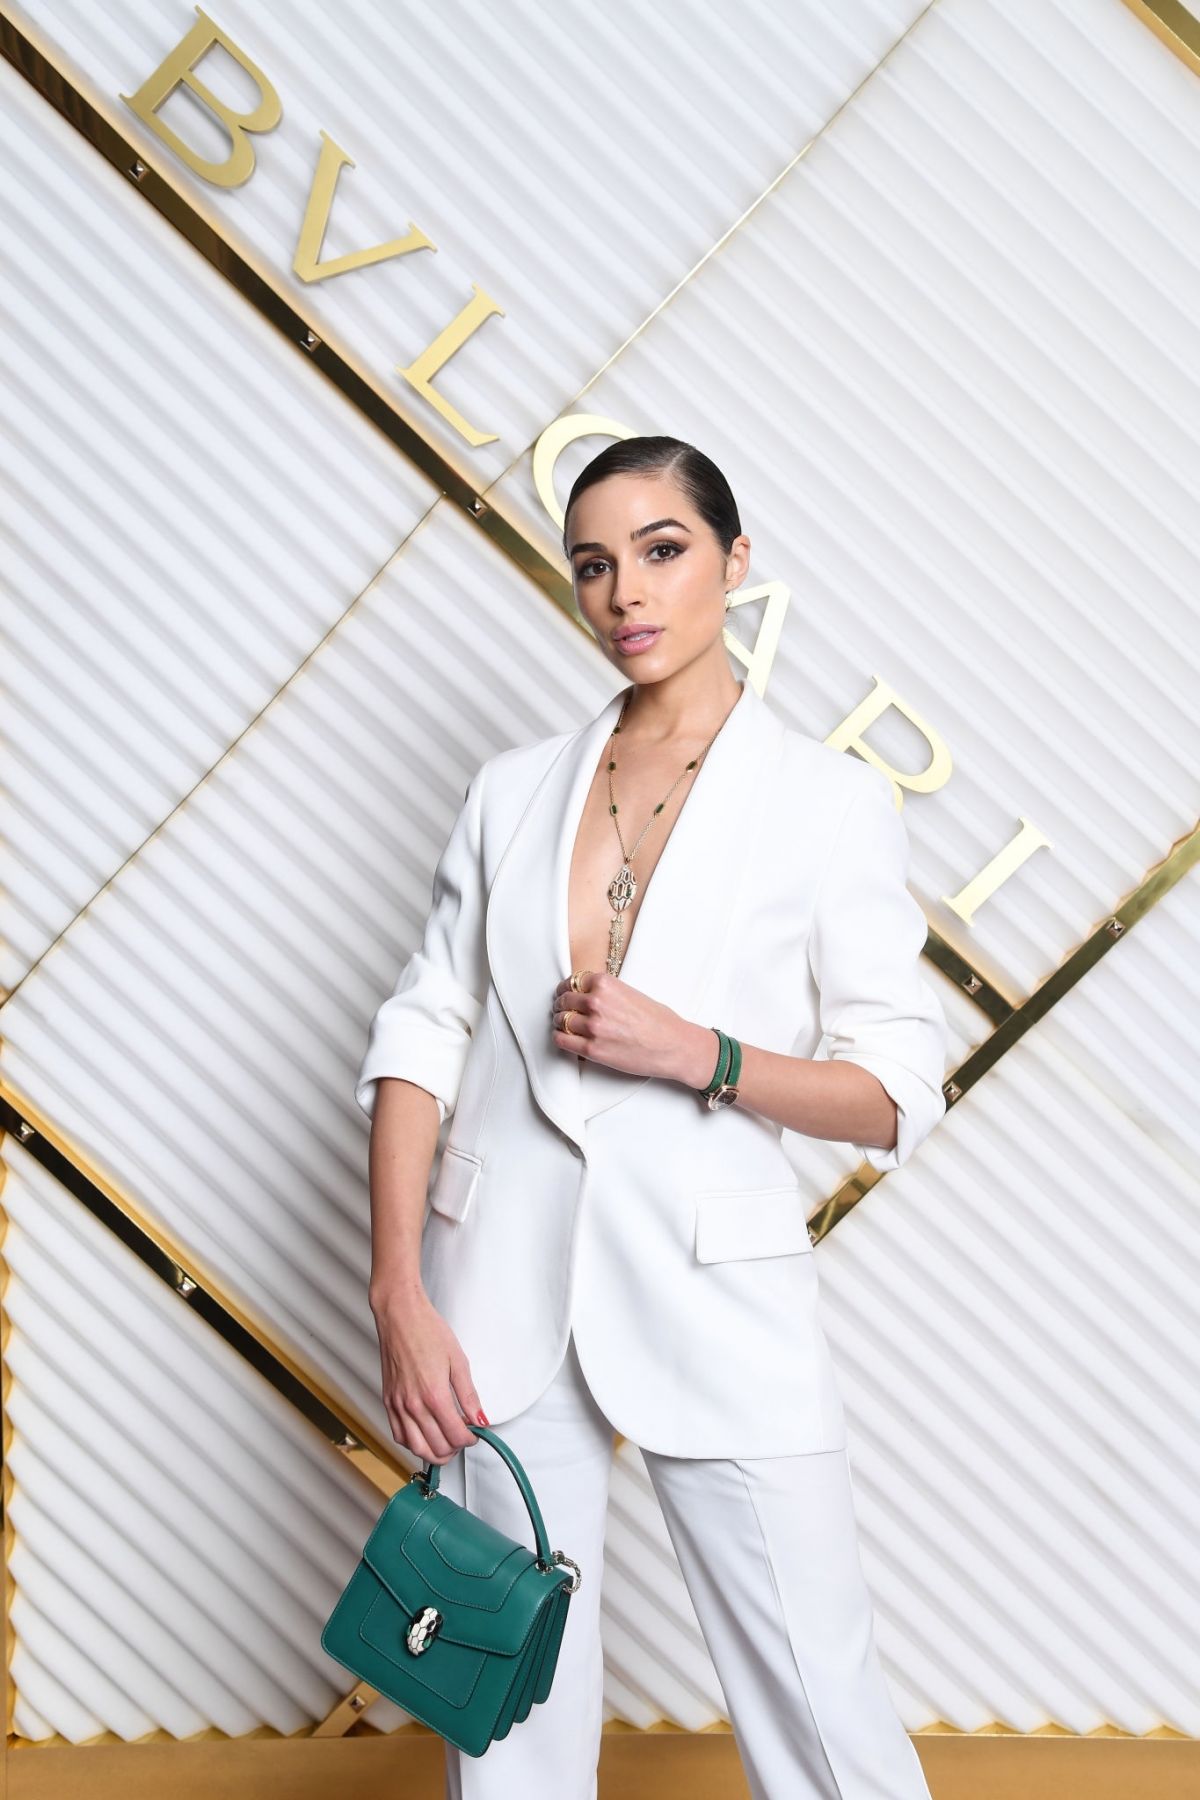 Olivia Culpo Bvlgari Dinner Party in Milan February 22, 2019 – Star Style